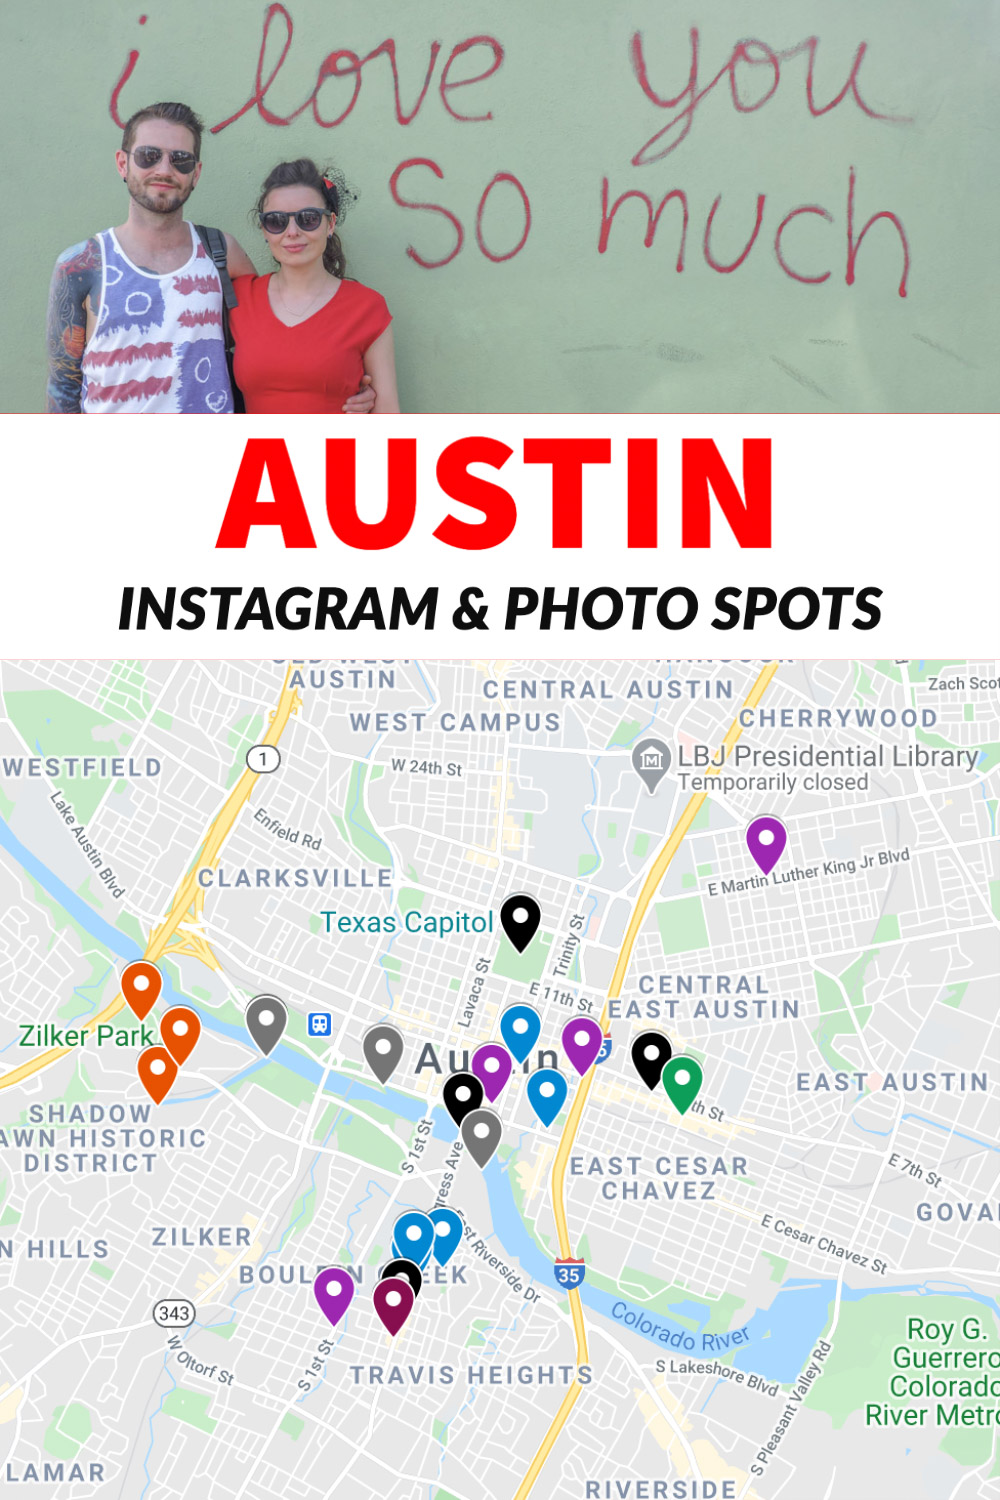 Looking for the best Instagram spots in Austin, Texas? This guide details cool streets, hip hotels, awesome murals, landmarks and the cutest couple photo locations in Austin. Map included!